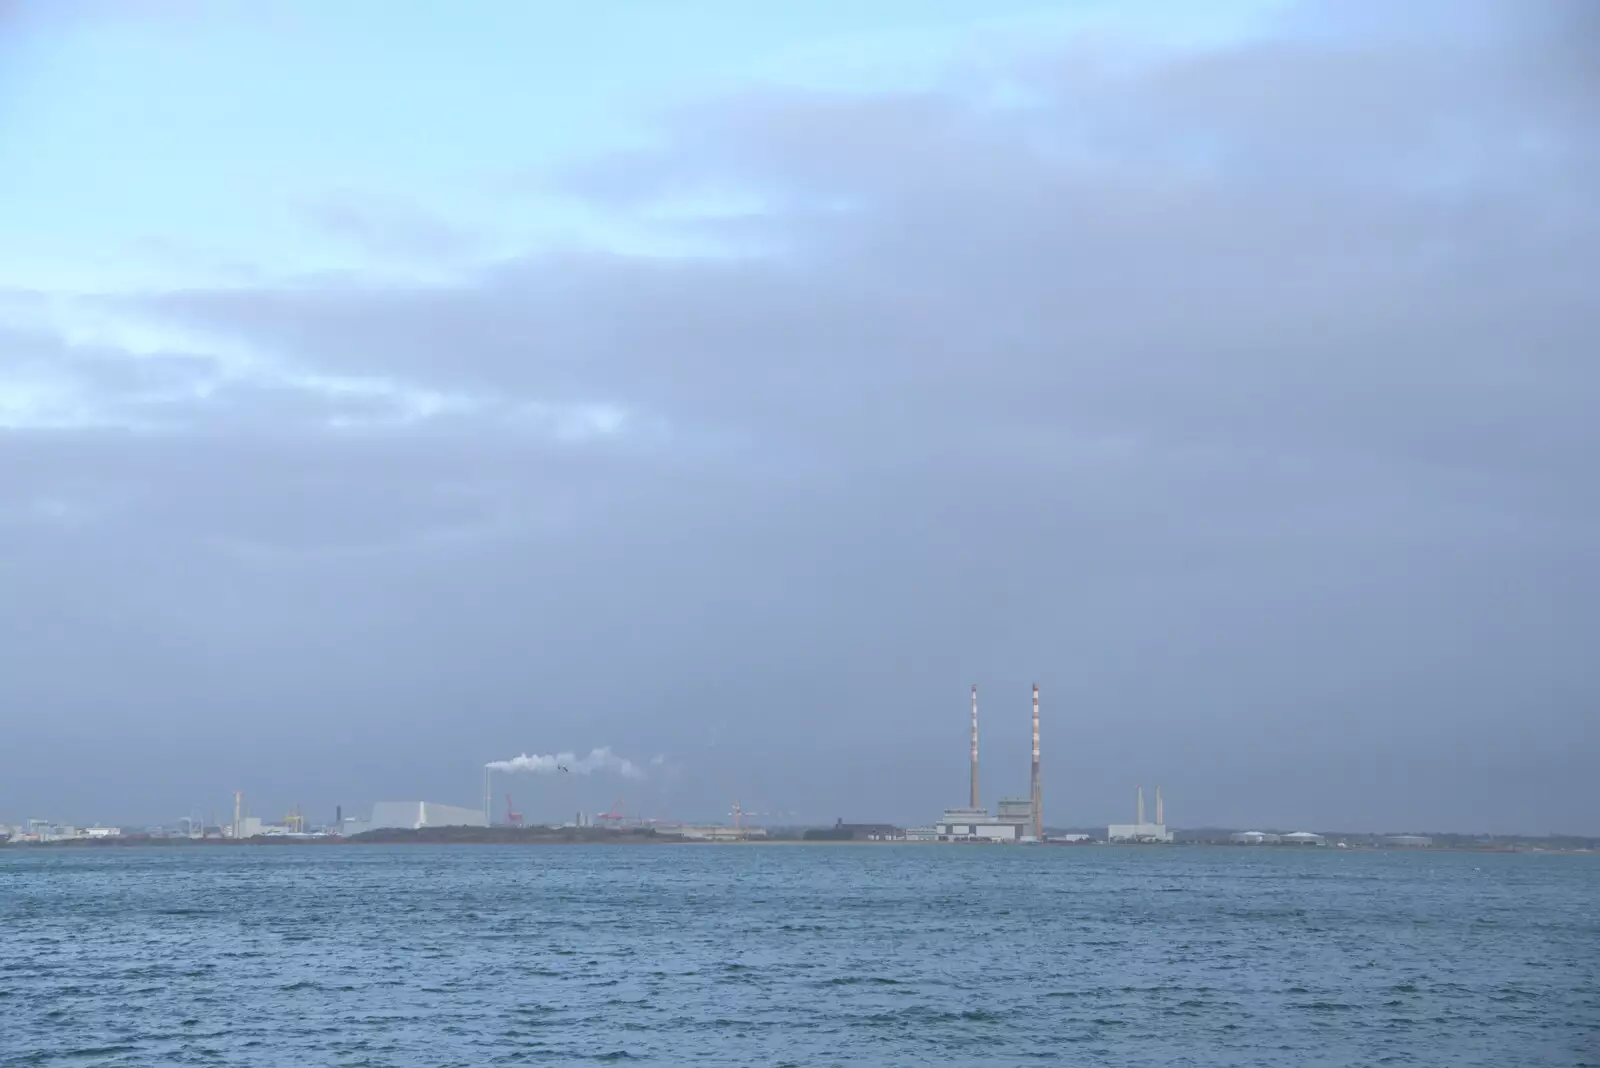 Poolbeg generating station and the Winkies, from The Dead Zoo, Dublin, Ireland - 17th February 2023